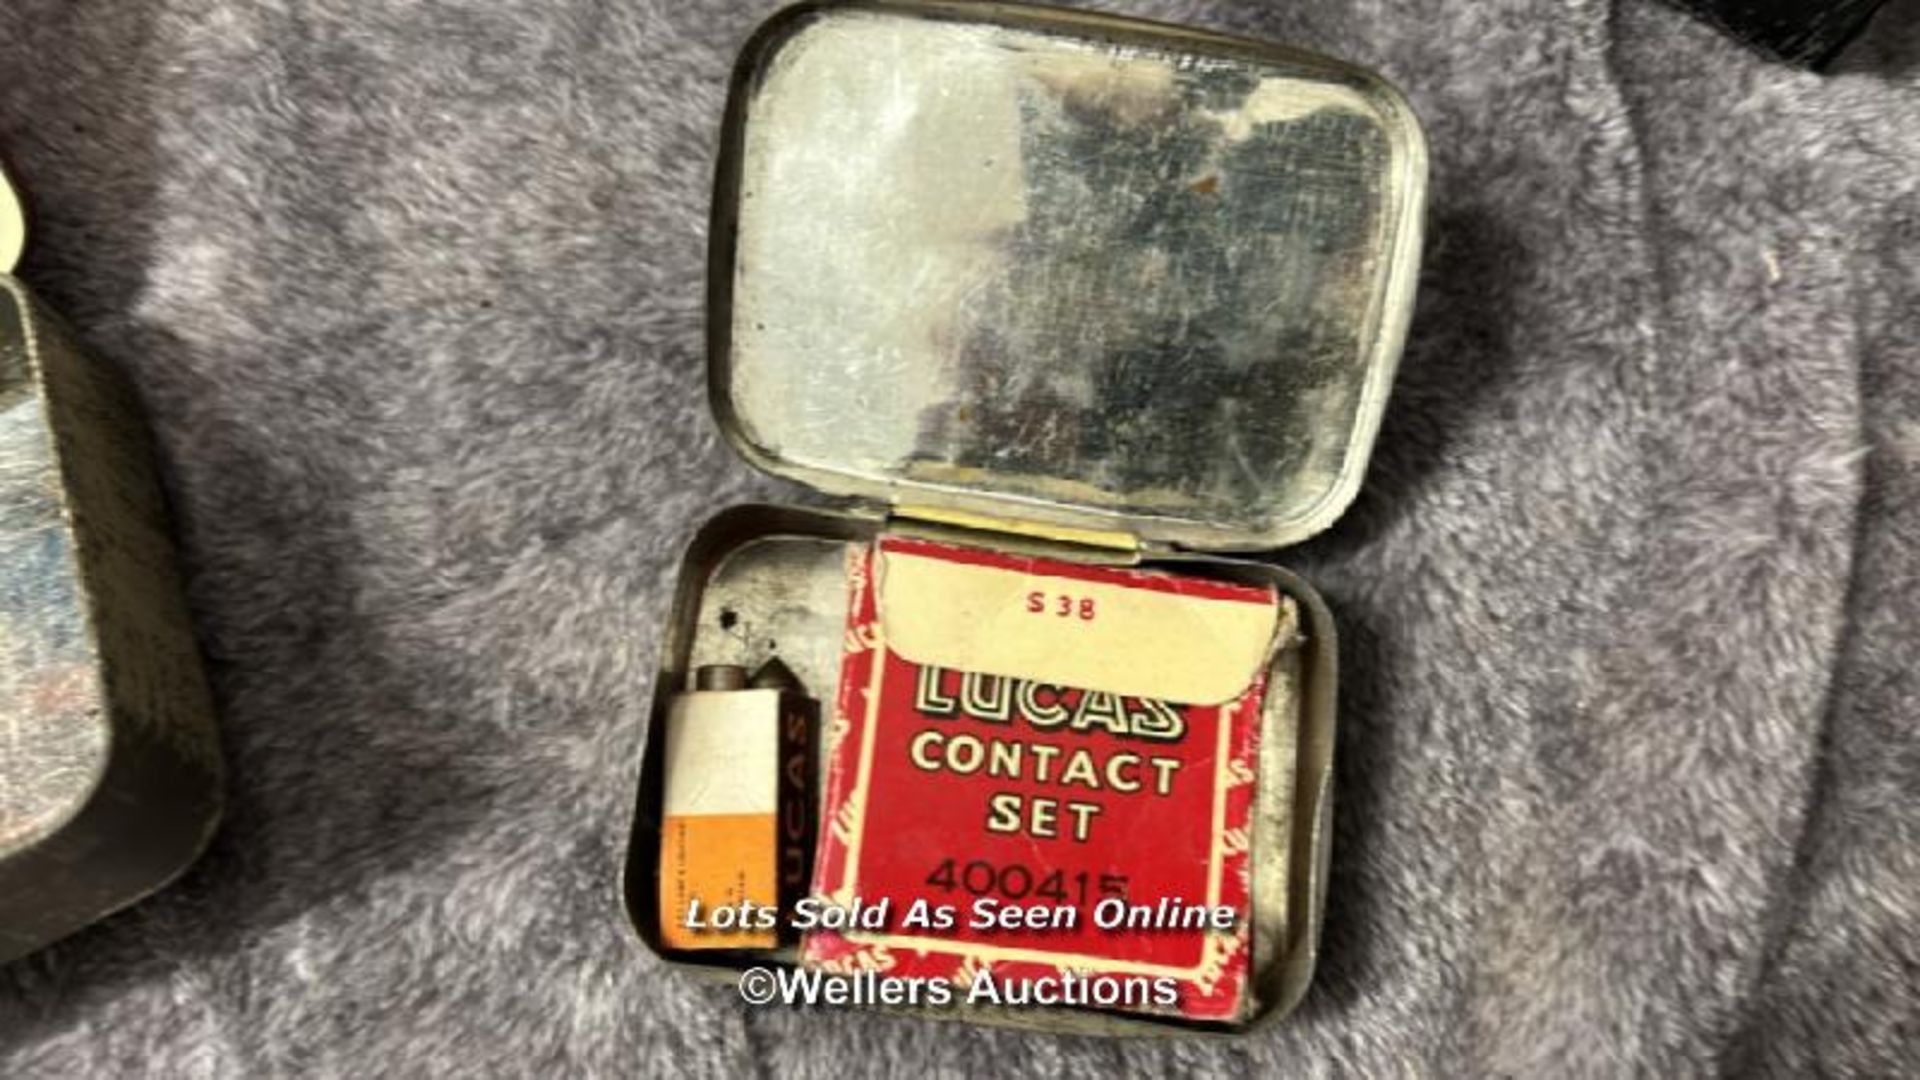 Vintage Readers Digest first aid box with contents, vintage empty Boots first aid kit tin and others - Image 5 of 7